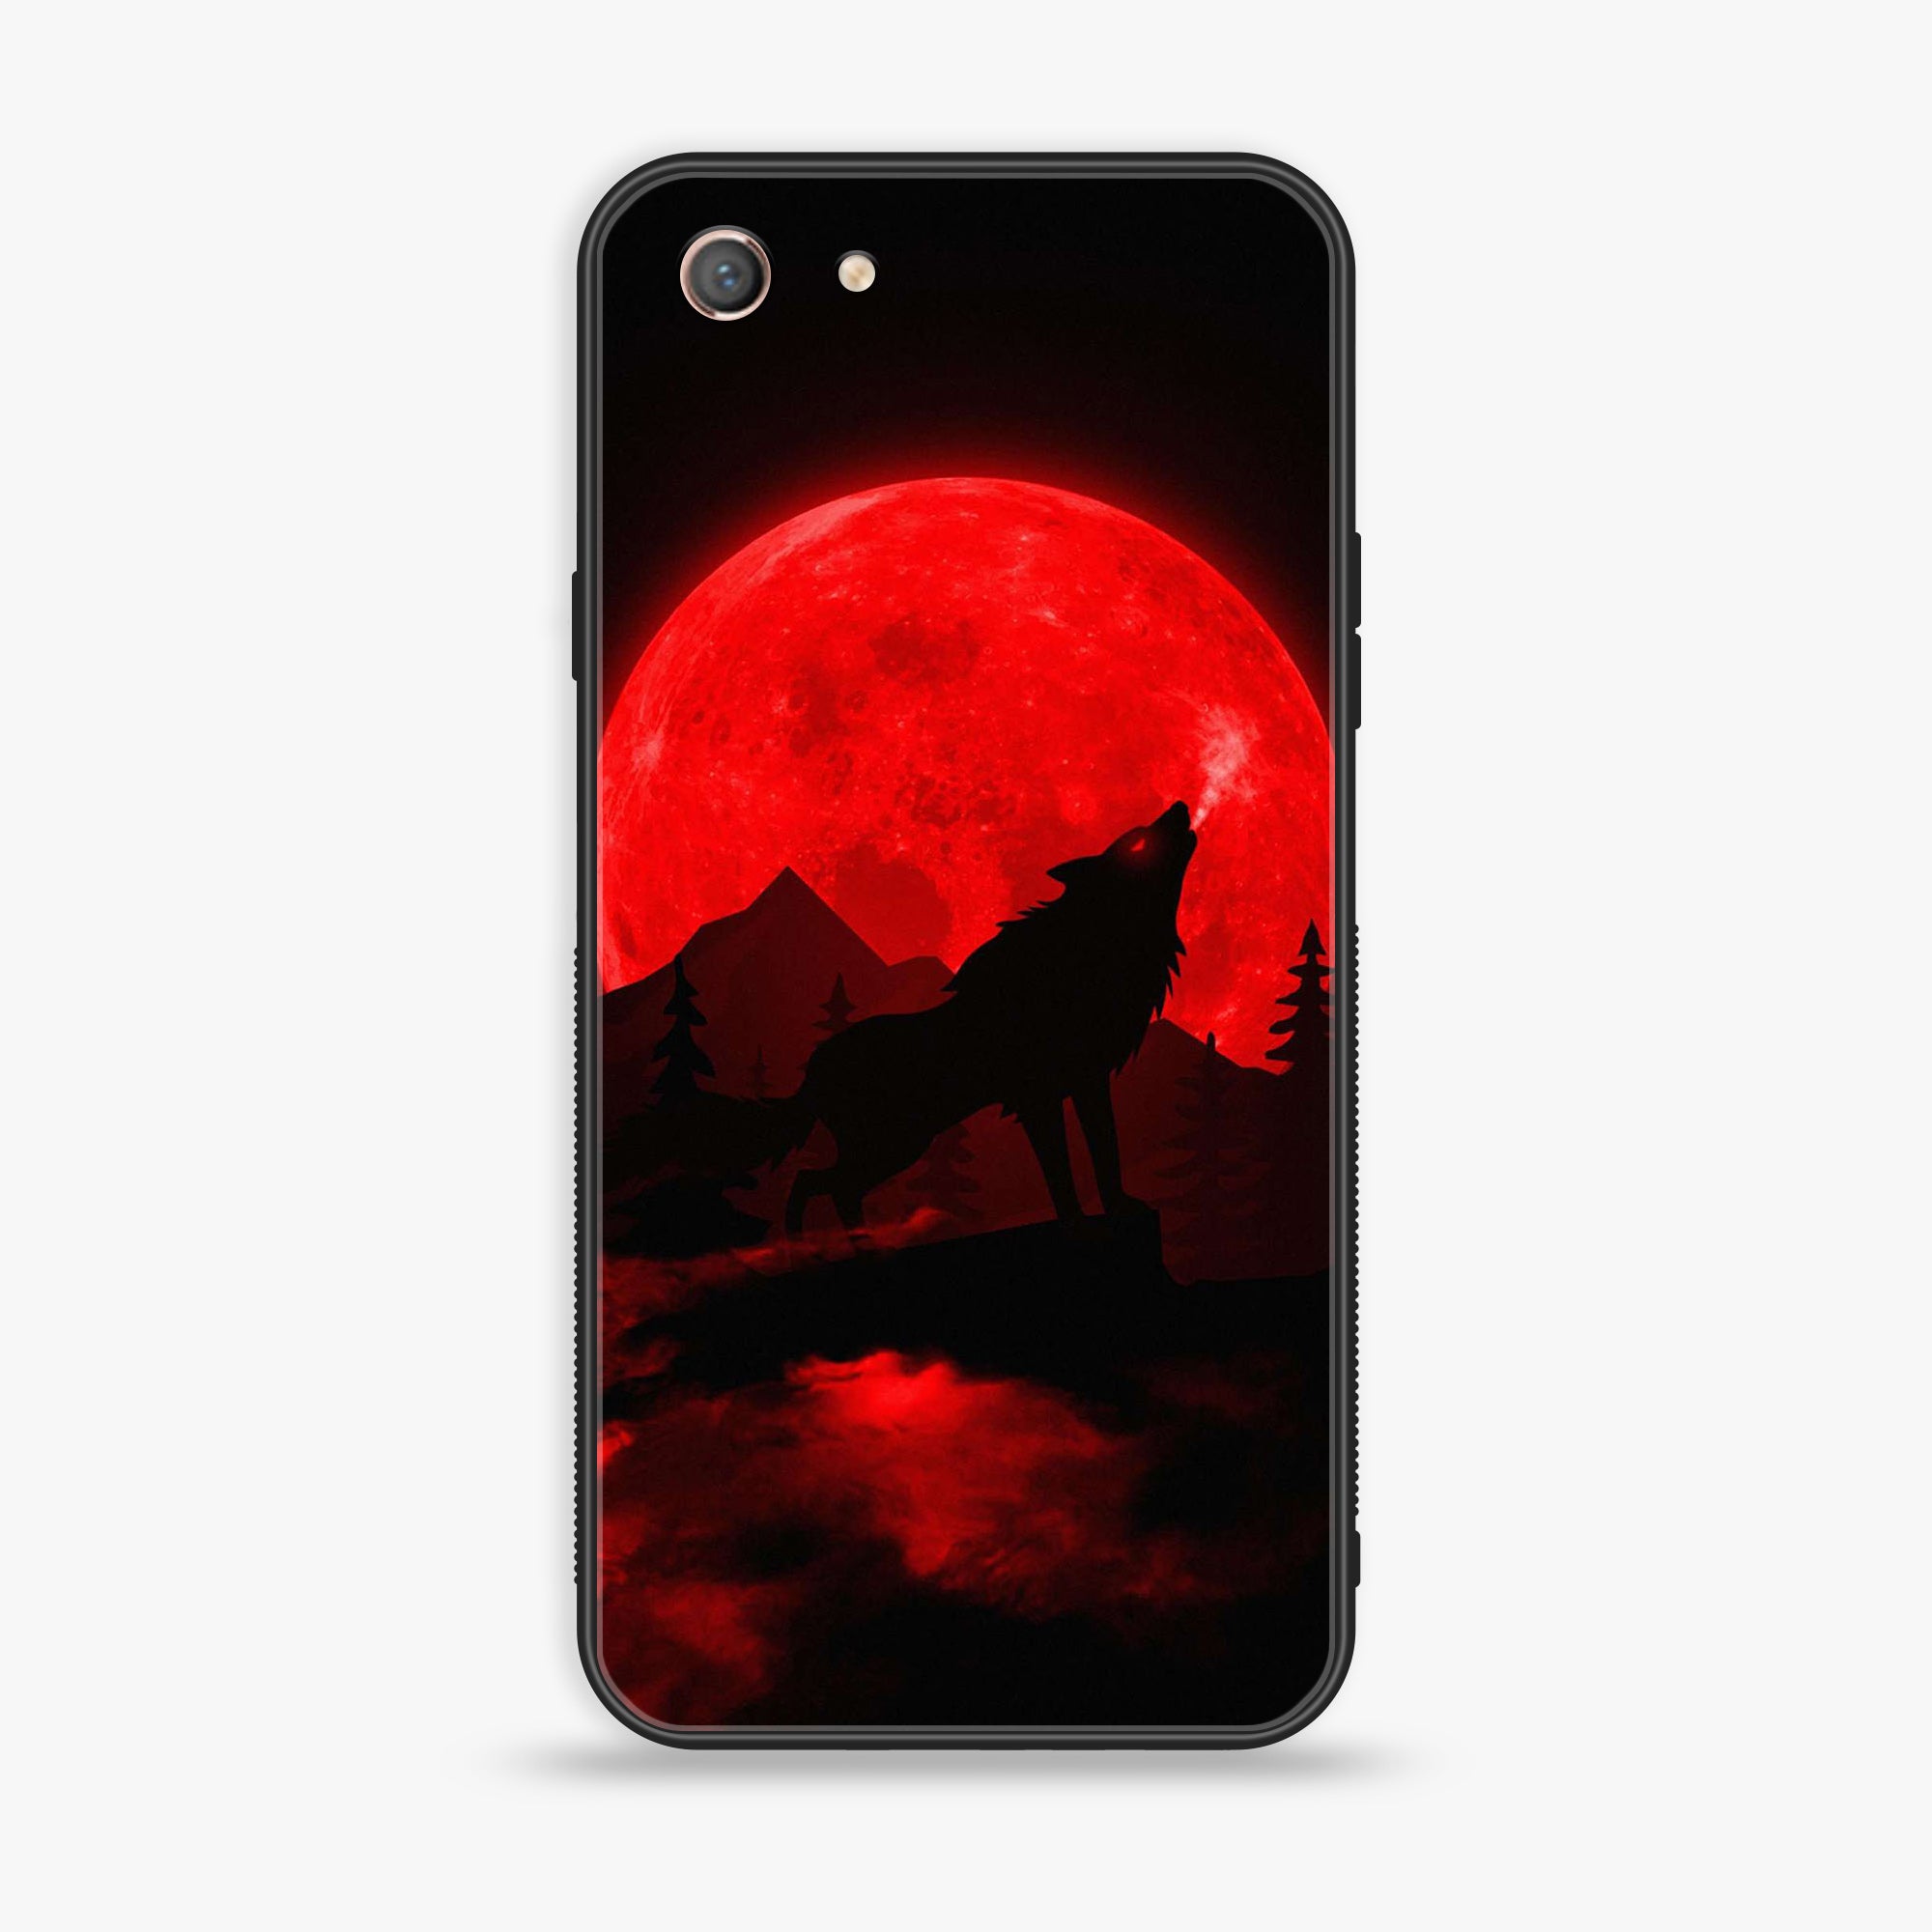 Oppo A71 (2017)  - Wolf Series  - Premium Printed Glass soft Bumper shock Proof Case